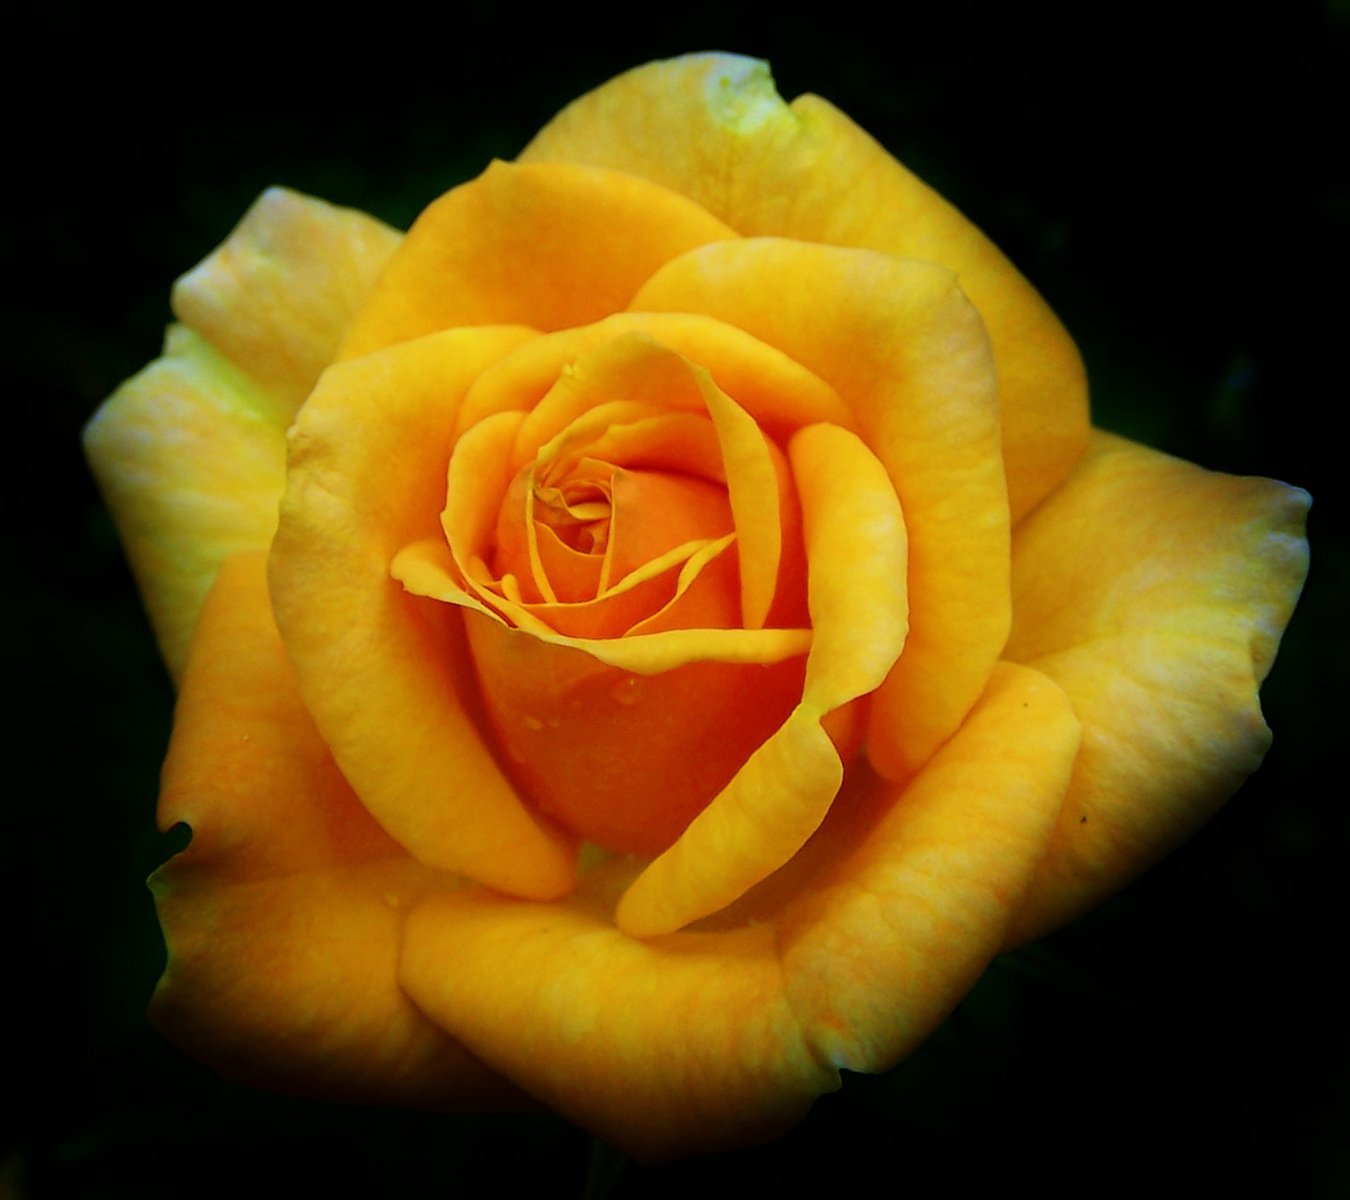 a close up po of a yellow rose